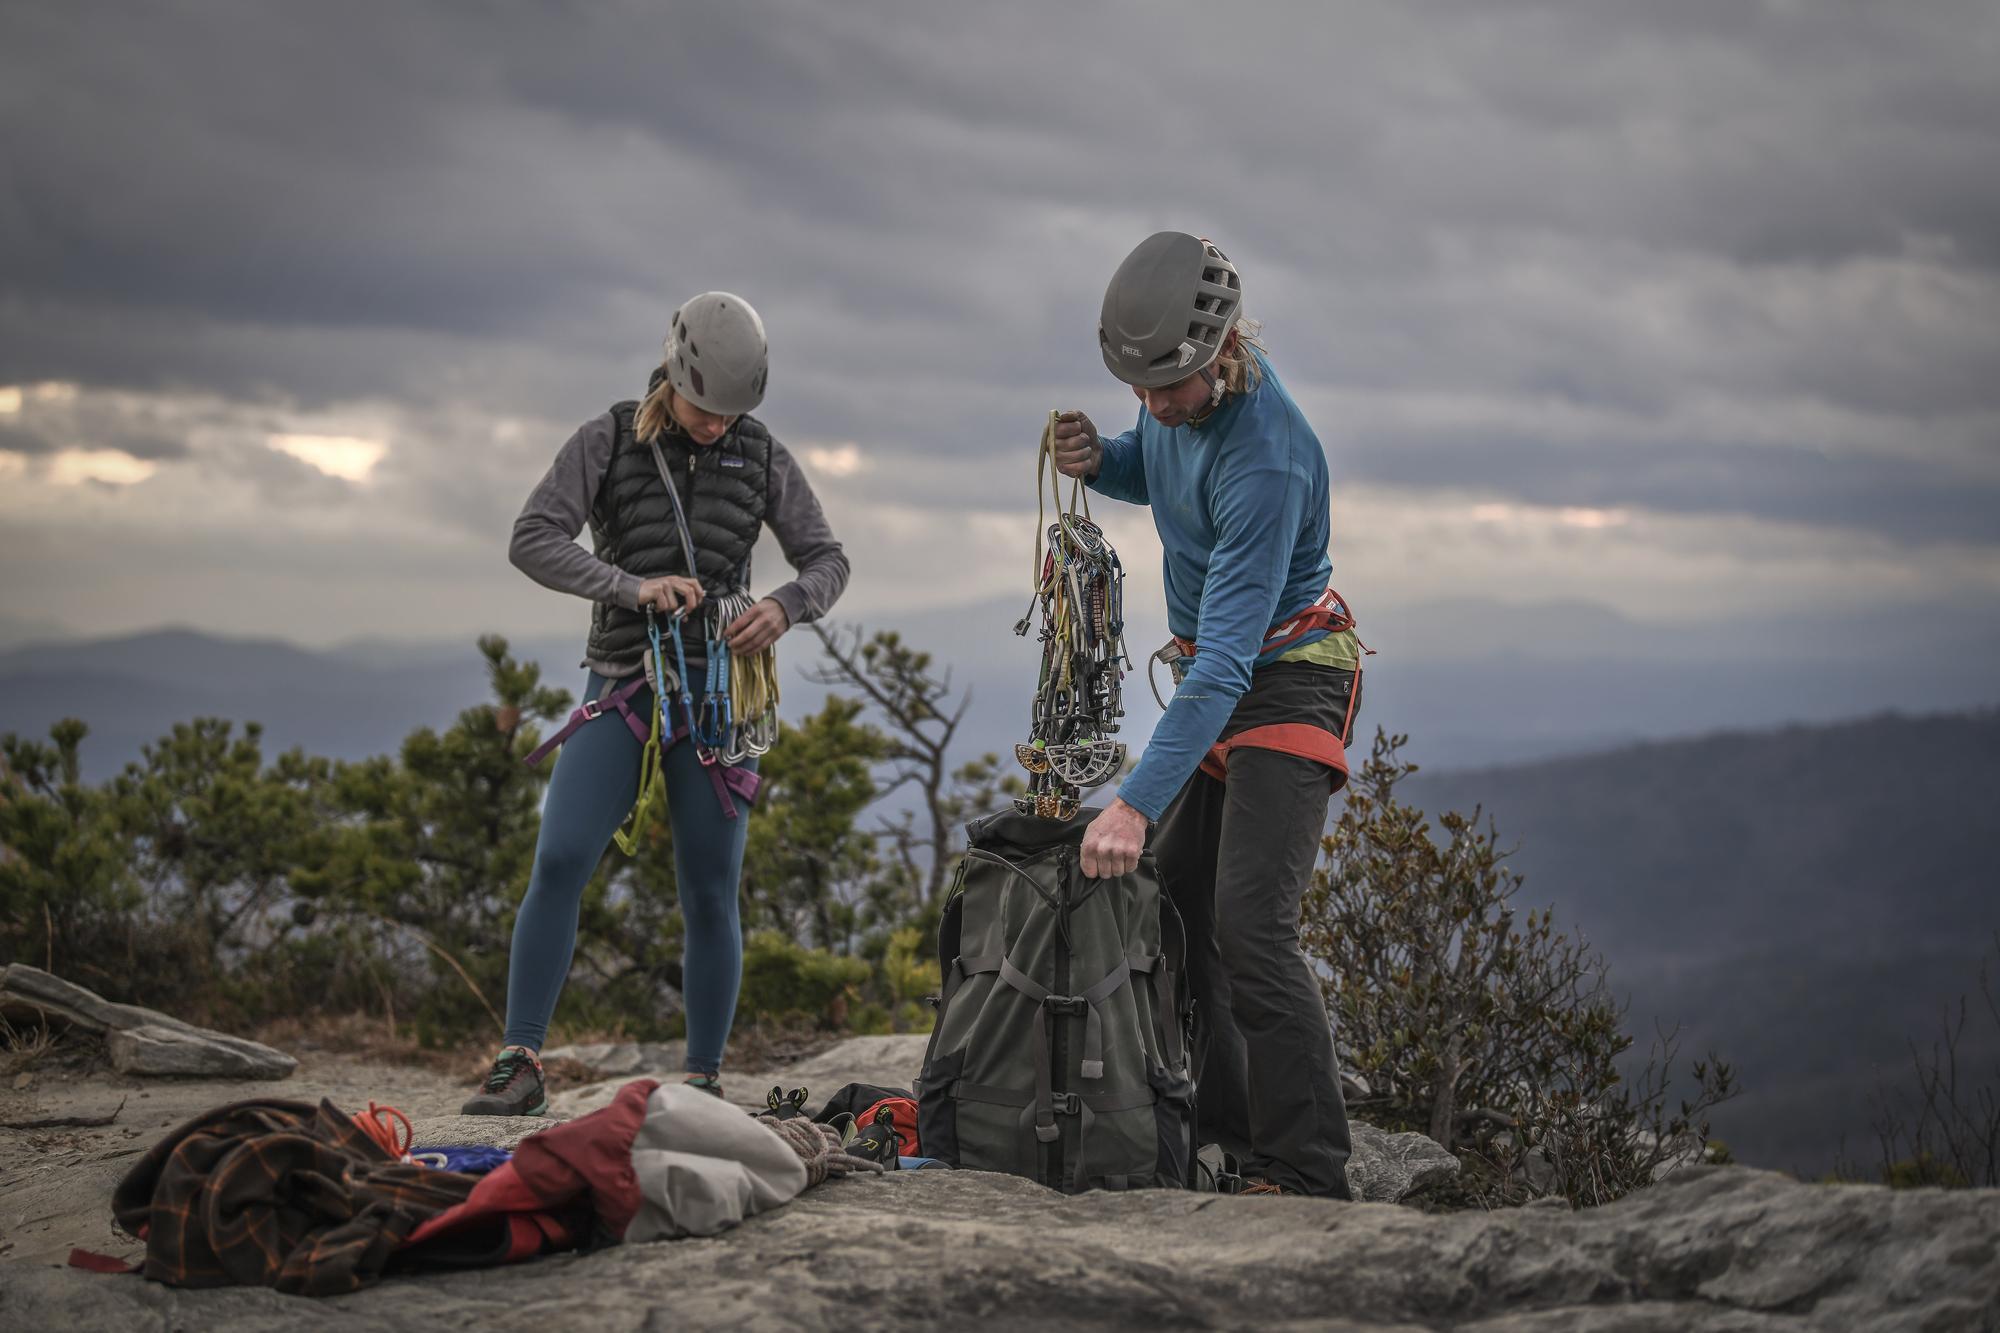 Trad Climbing photos from Linville Gorge by Bryan Miller